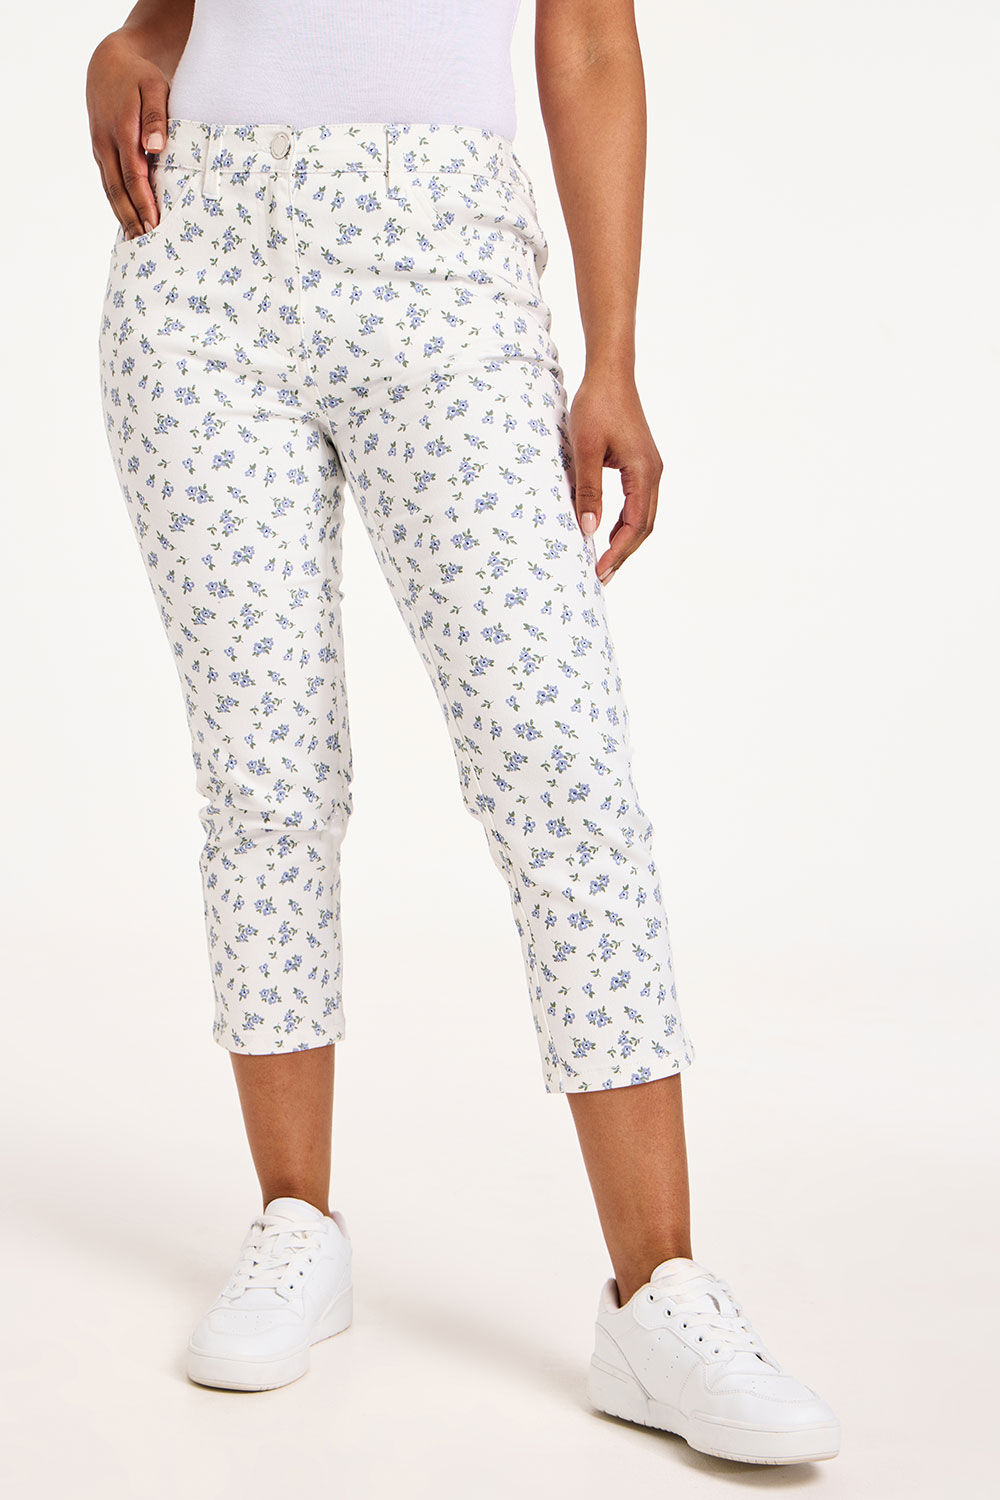 Bonmarche Ivory The Sara Meadow Floral Print Cropped Jeans, Size: 18